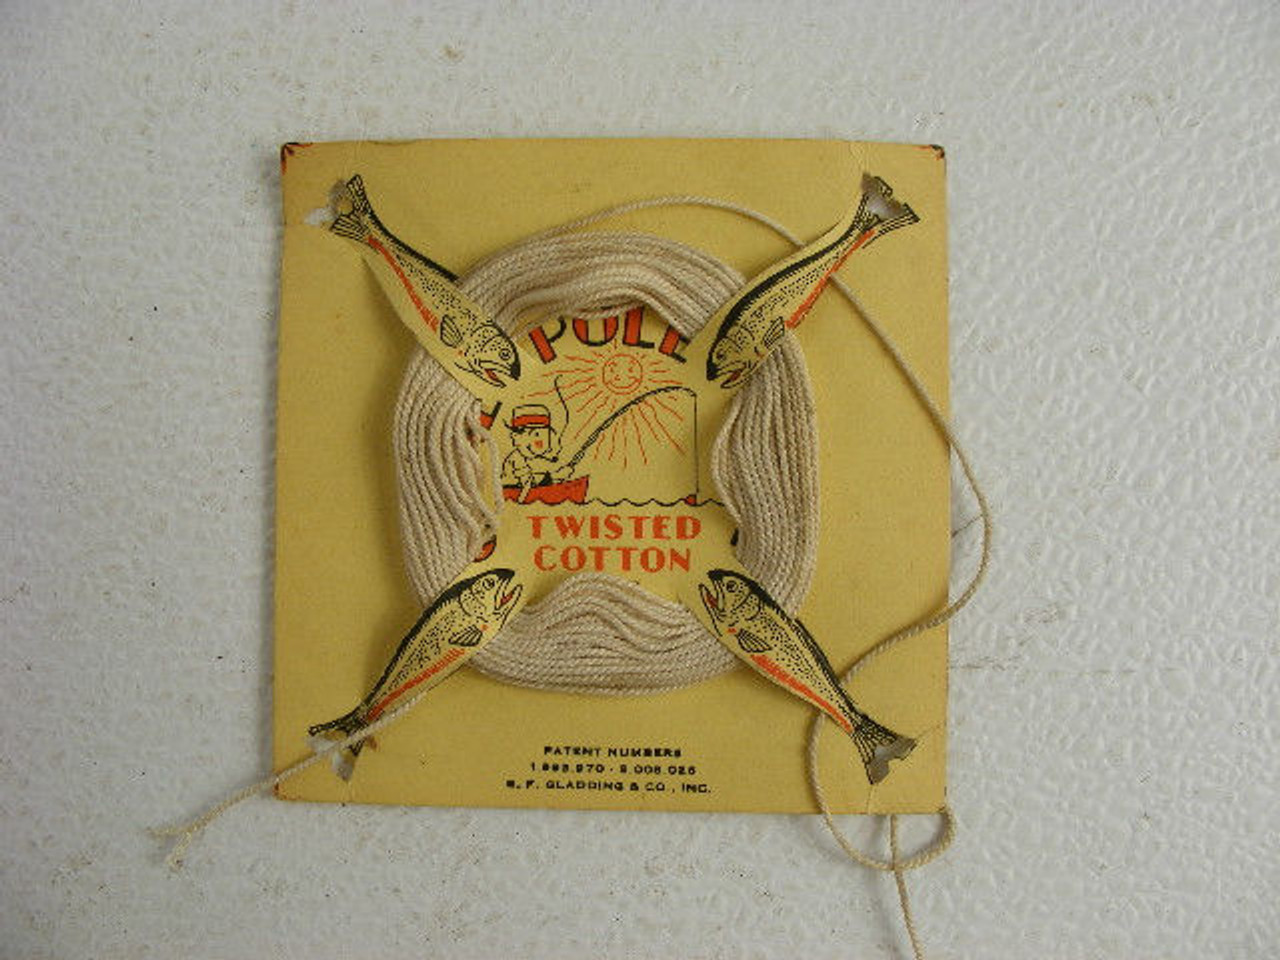 A neat vintage cane pole fishing line card designed with fish for